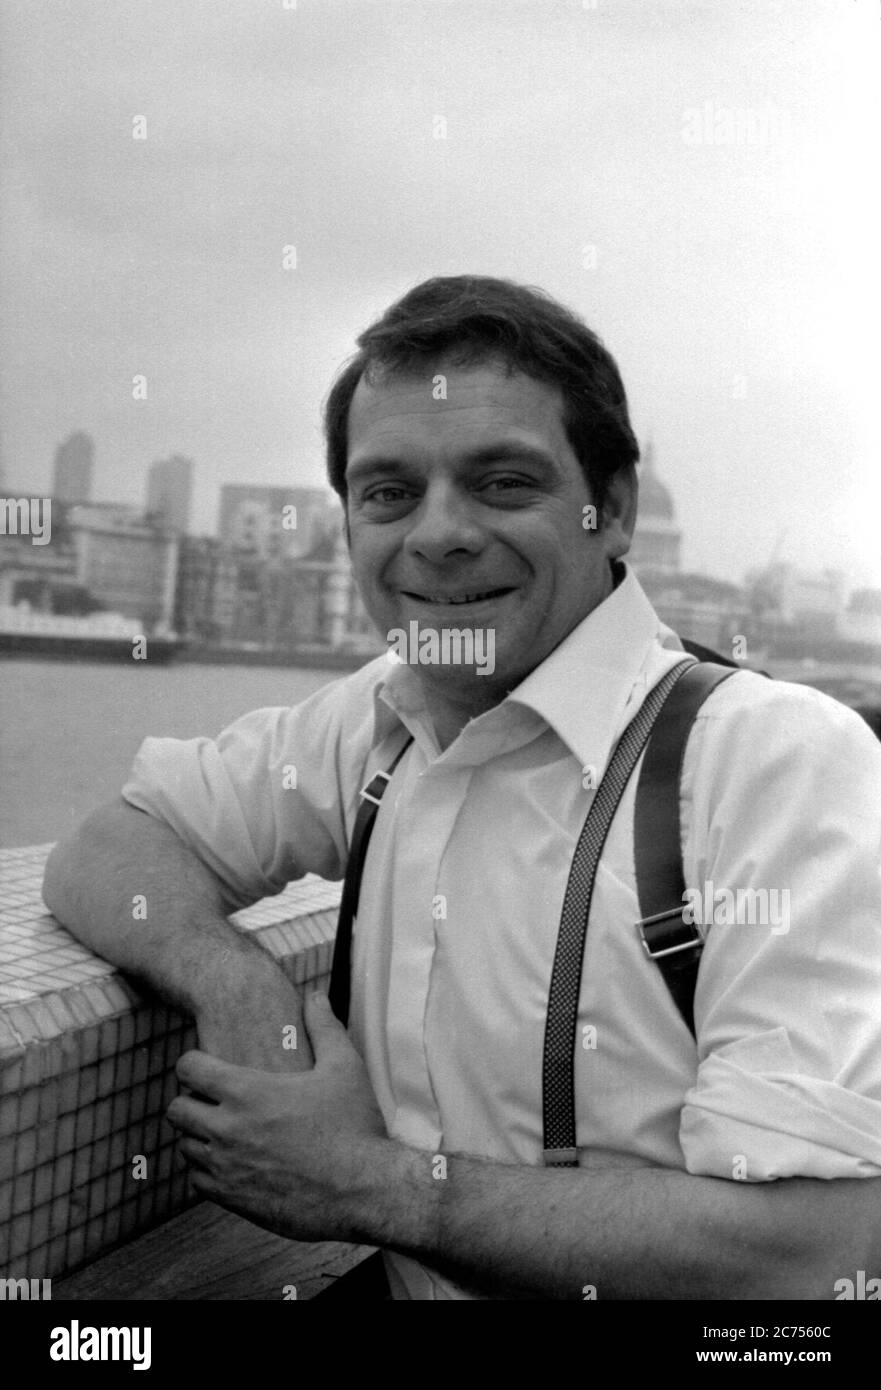 Actor and comedian David Jason, famous as Del Boy Trotter in Only Fools and Horses, poses in London in the 1970s Stock Photo